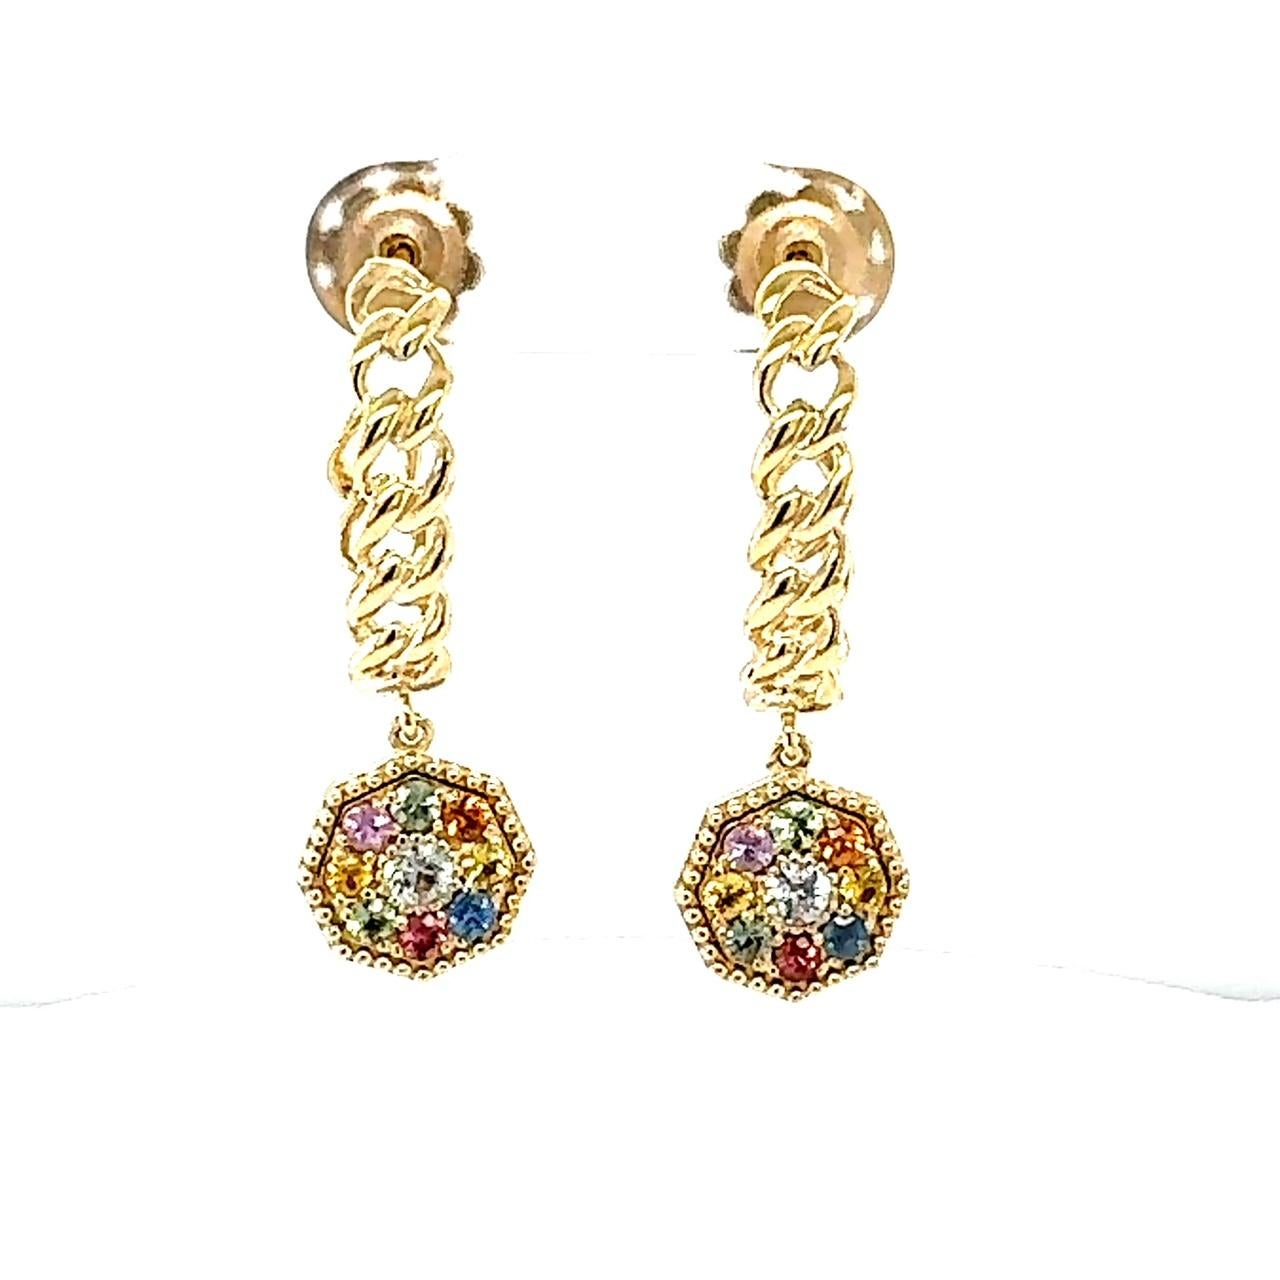 3.42 Carat Sapphire Yellow Gold Drop Earrings

These cute and vibrant Earrings have 18 Round Cut Multi-Color Sapphires that weigh 1.04 
The Earrings are about an 1.25 inch in length.
They are beautifully set in 14 Karat Yellow Gold and weigh